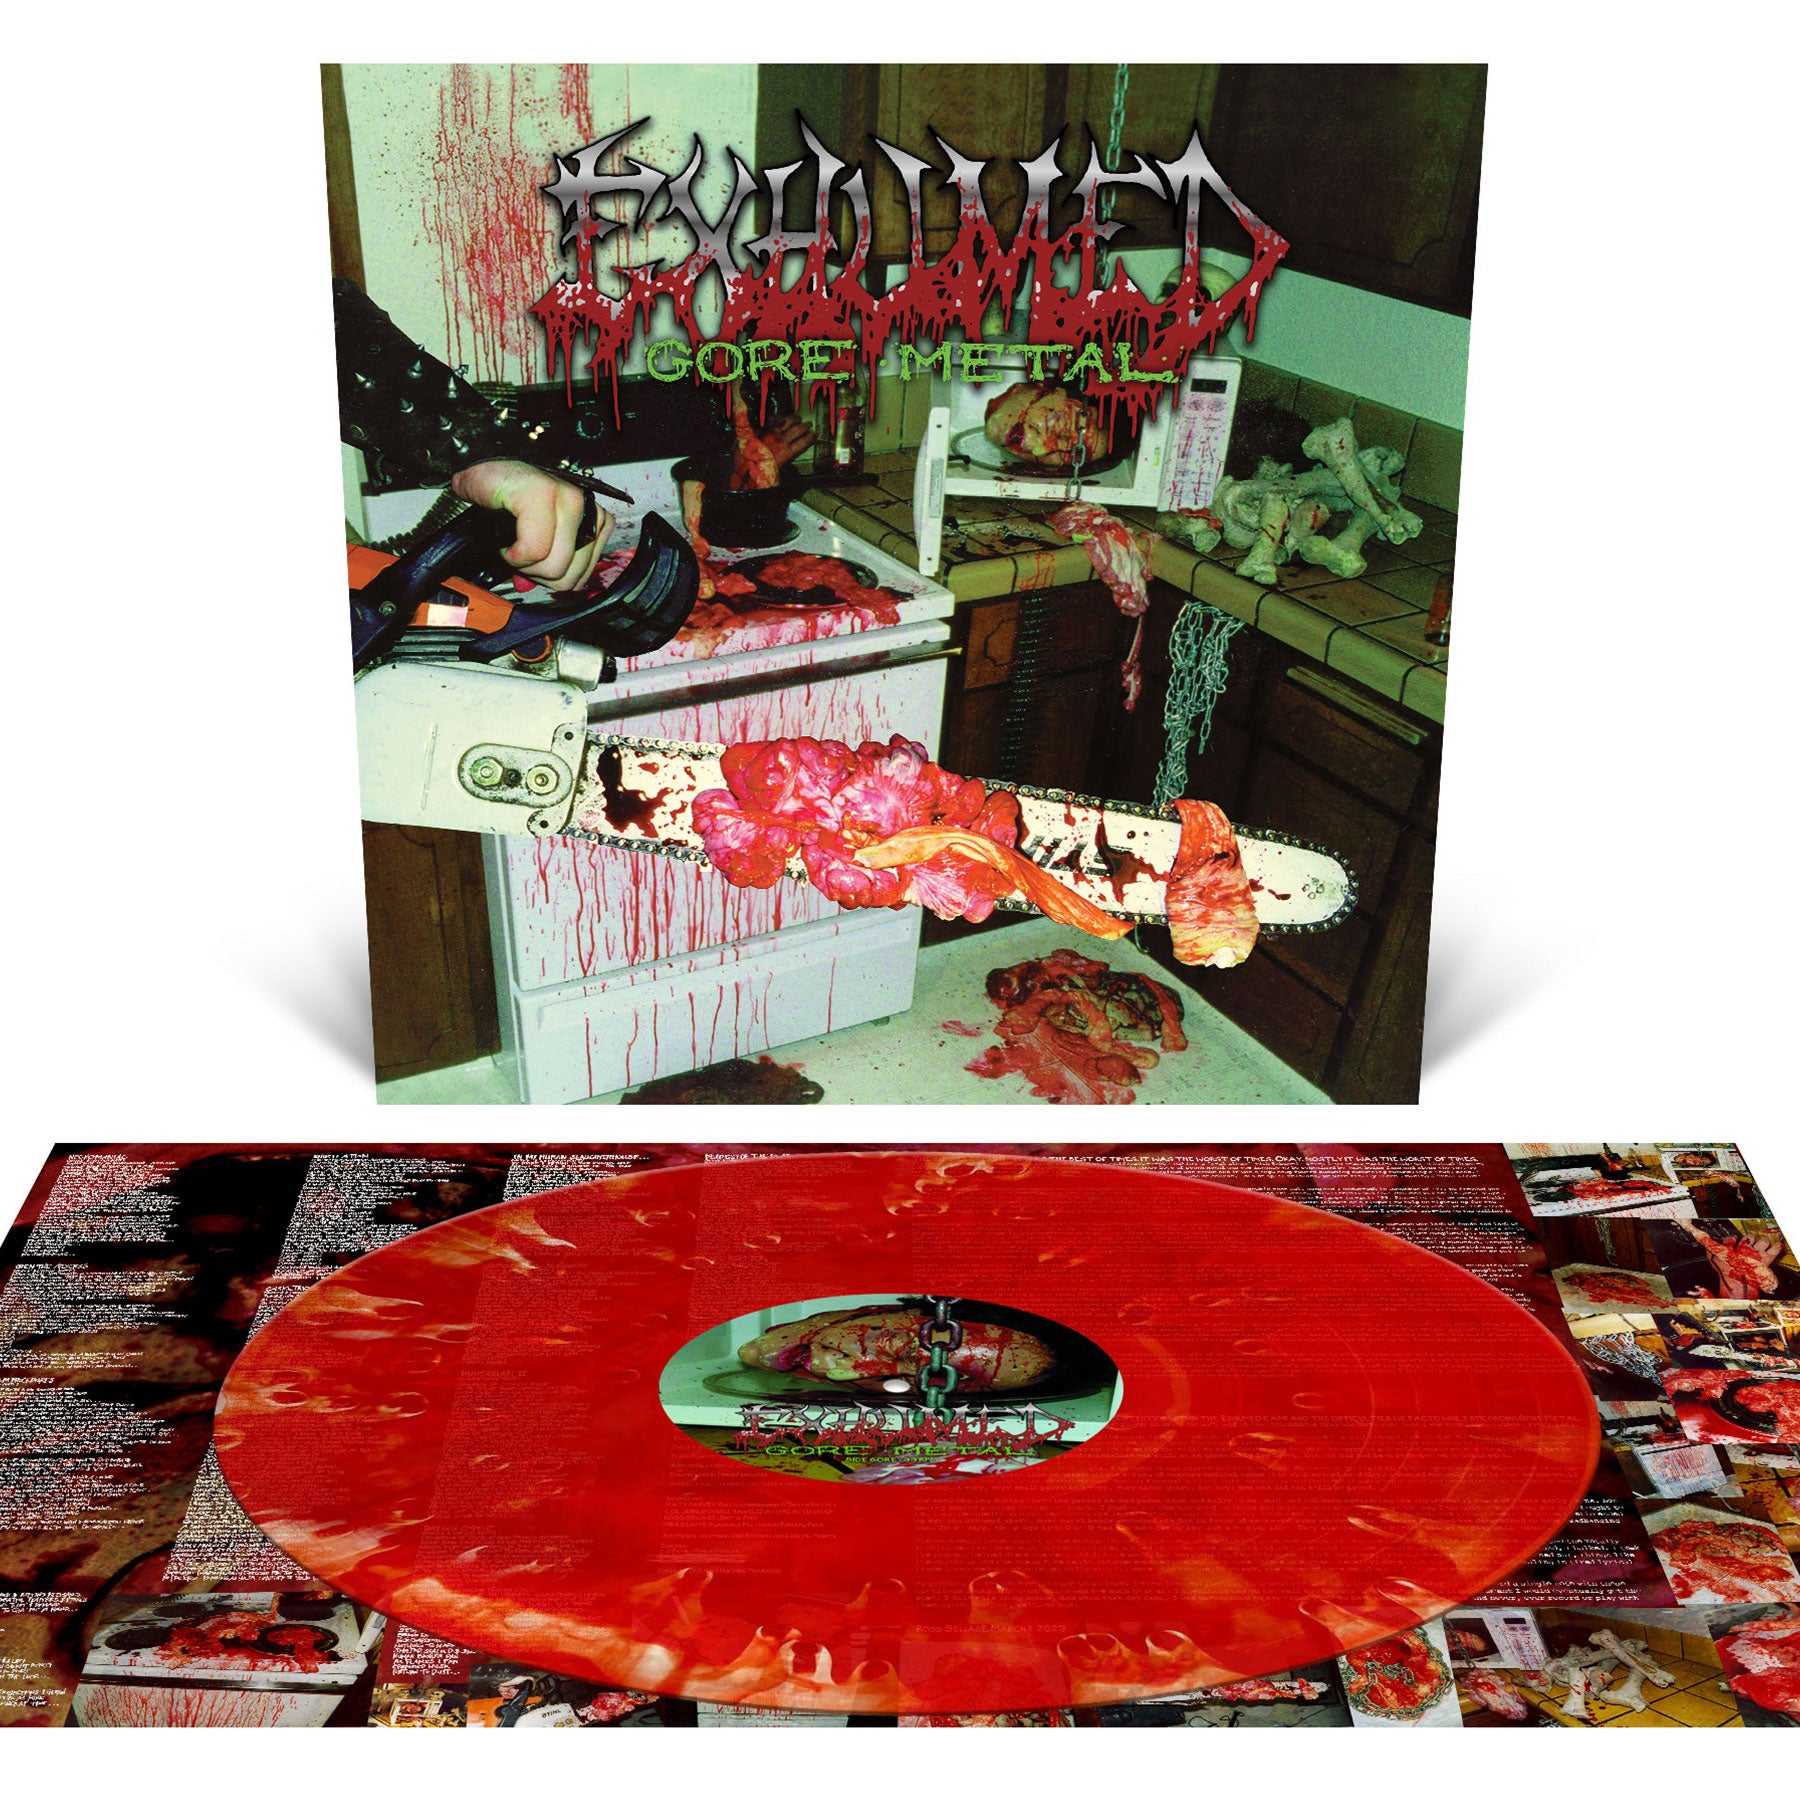 Exhumed "Gore Metal (25th Anniversary Reissue)" 12"